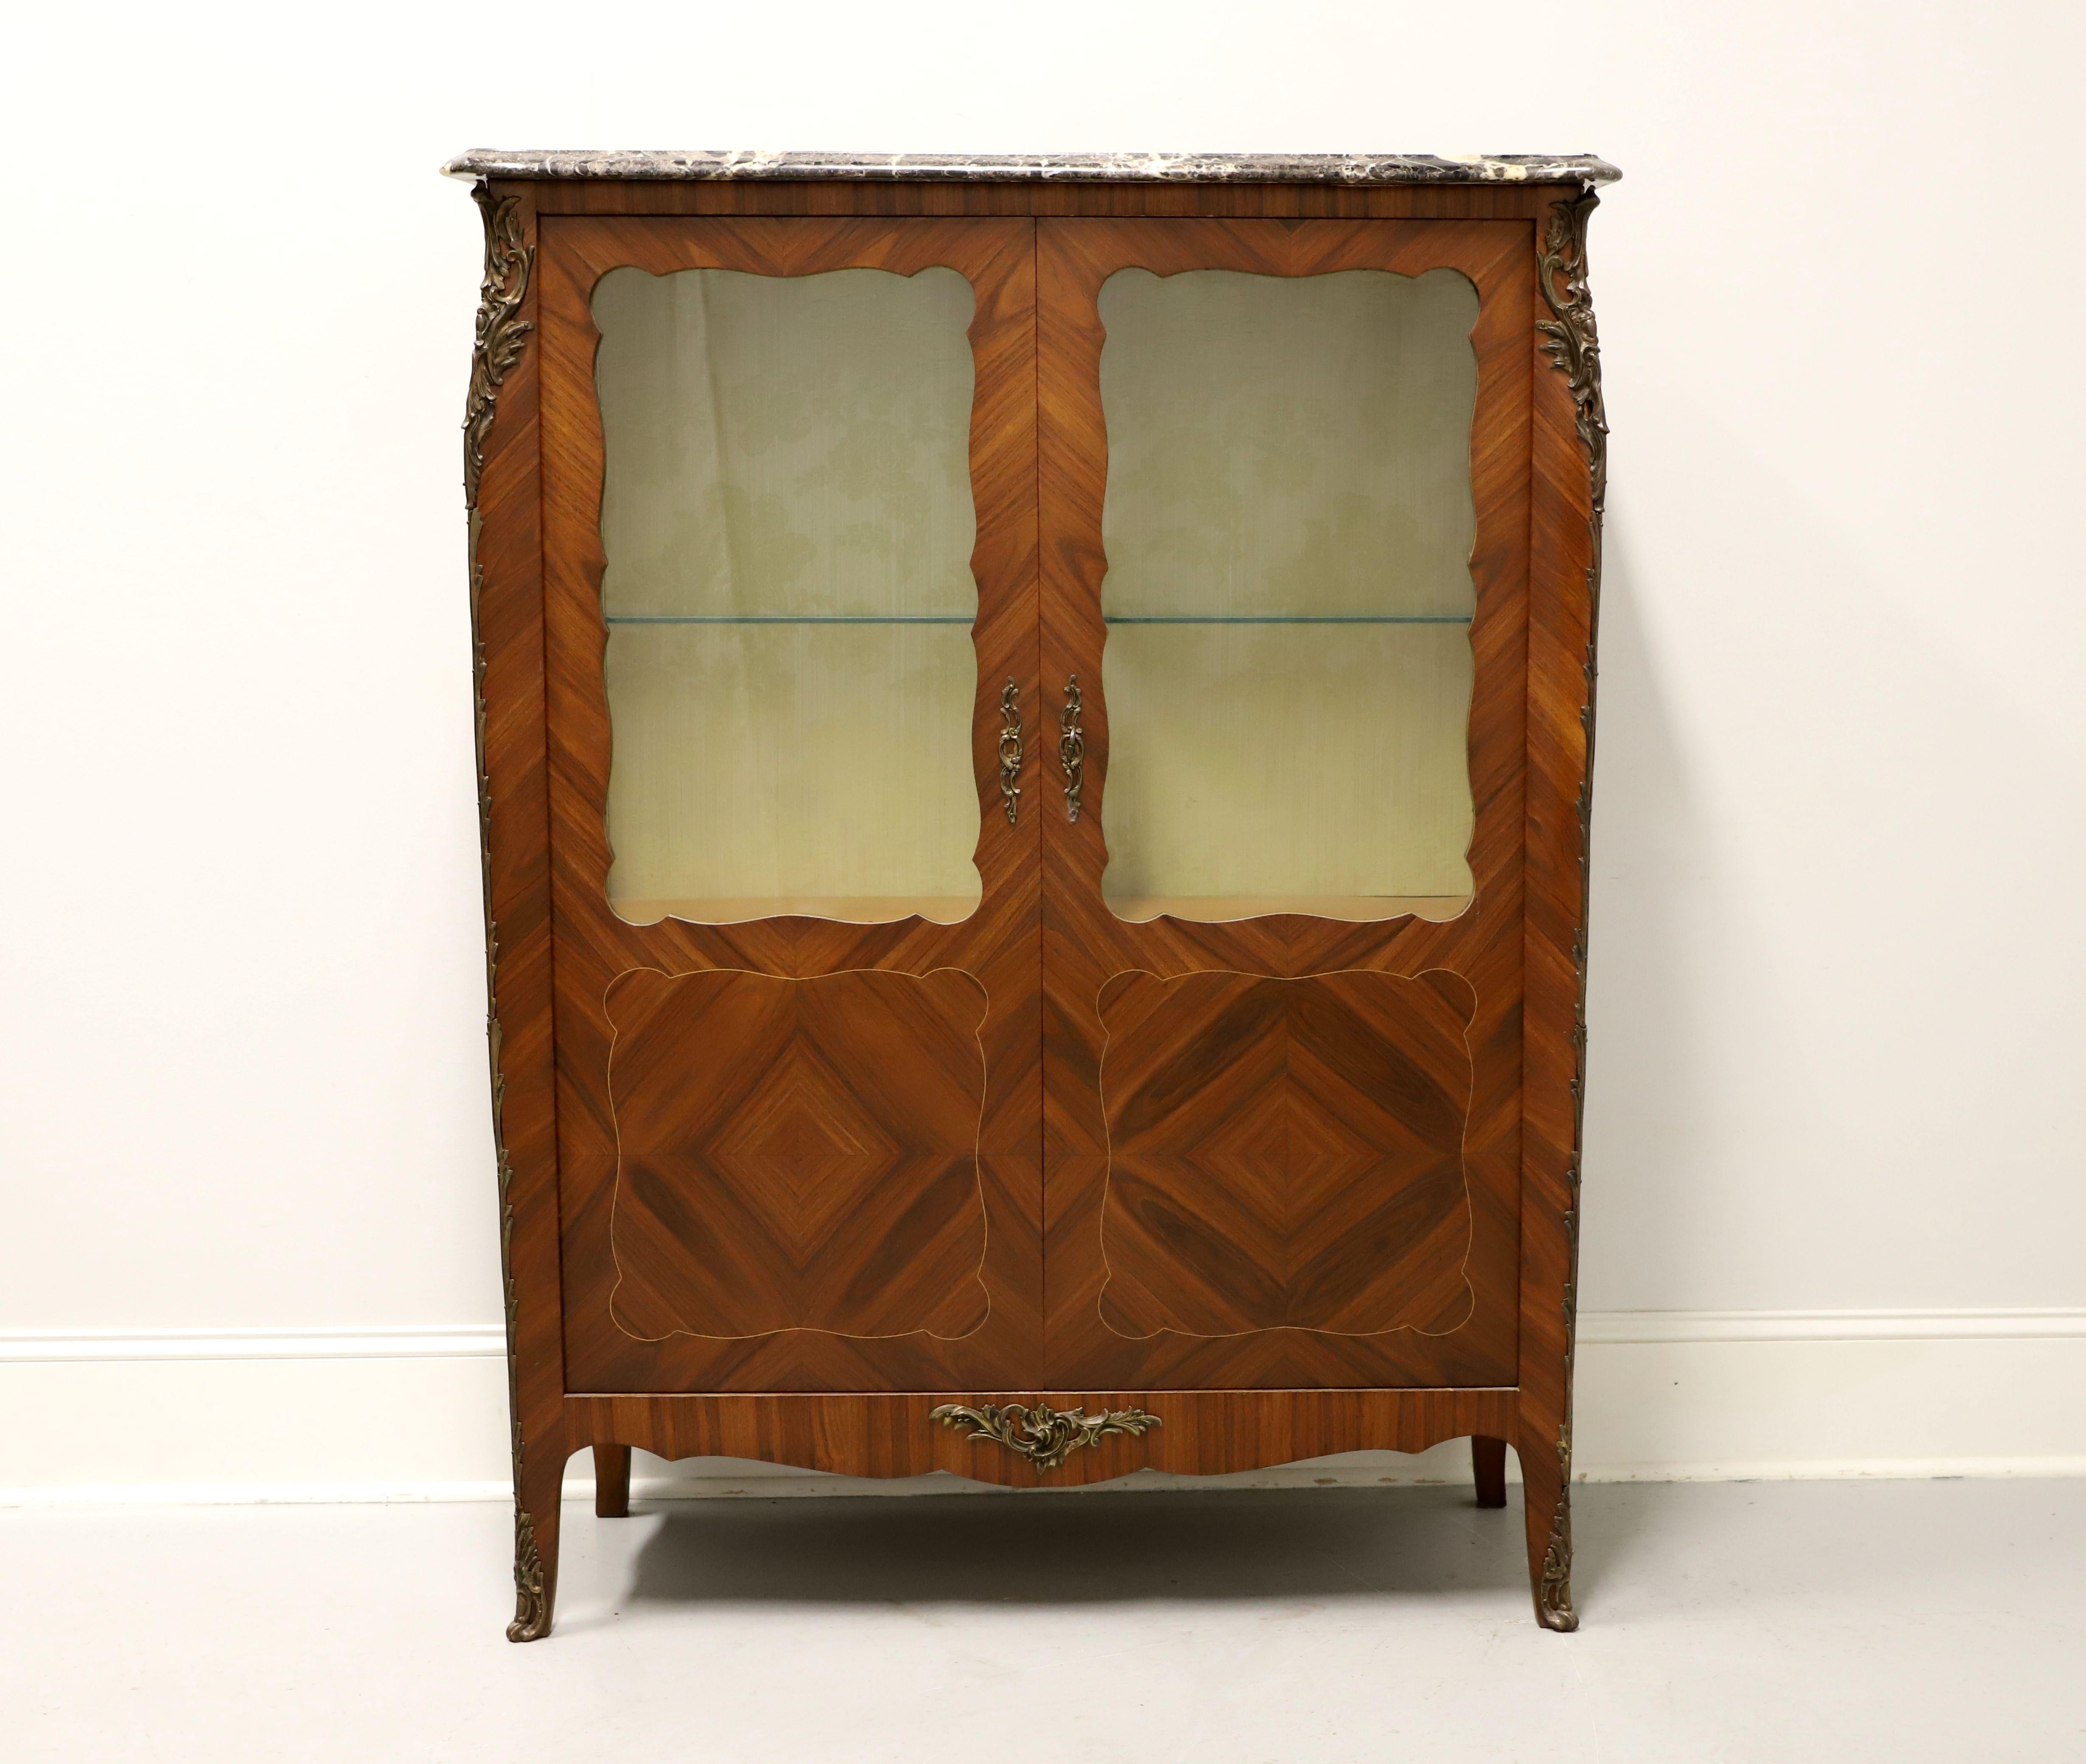 Here is an exquisite vitrine in the French Provincial, Louis XV style. Age unknown. Made from walnut with kingwood inlays and crotch veneers. Bronze ormolu mounts, marble top. Upper portion features glass doors with one glass shelf, inside is